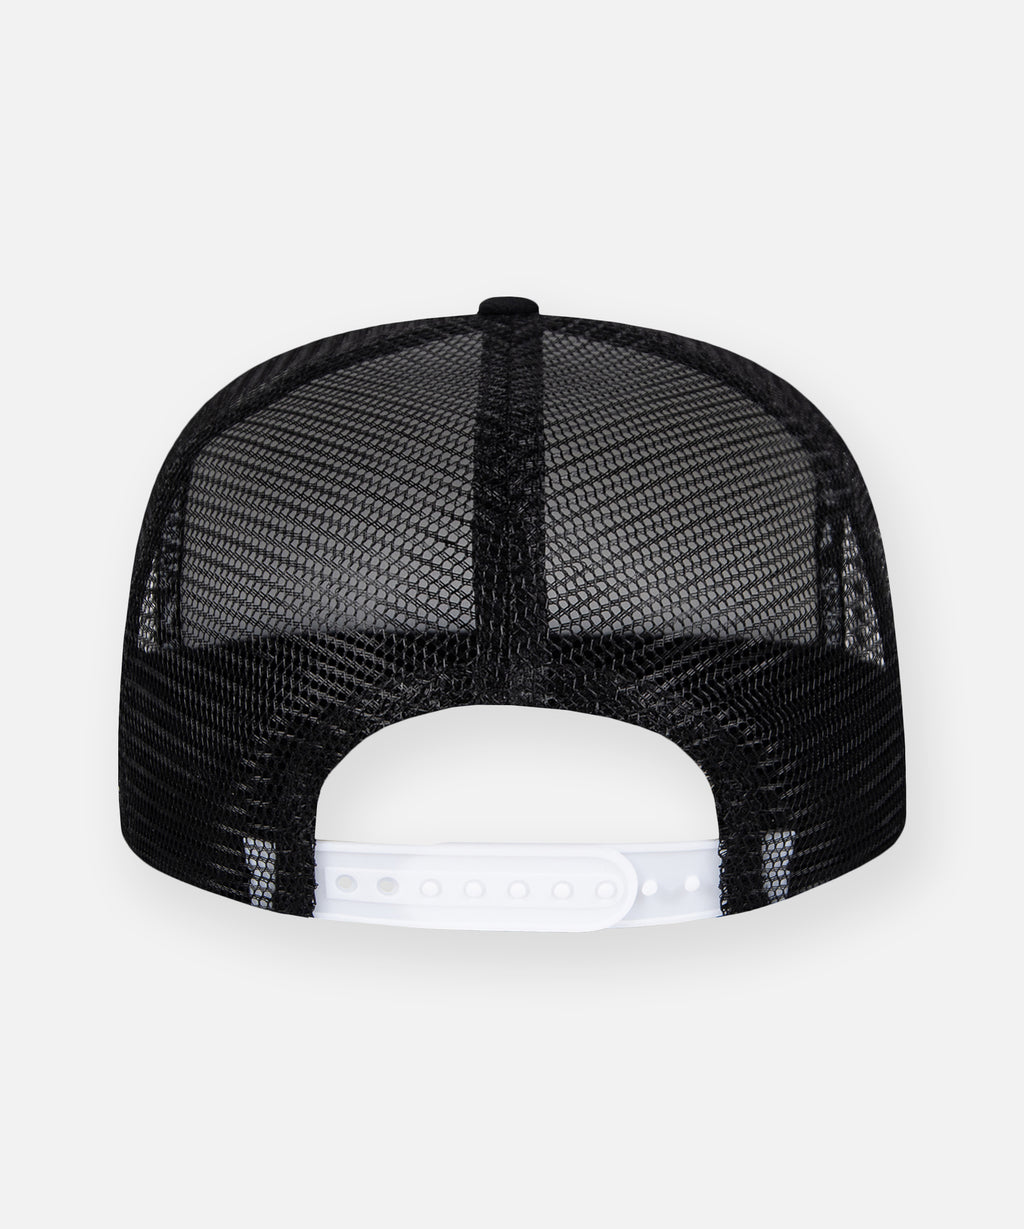  White snapback on Planes Greatness Trucker Hat color Black.